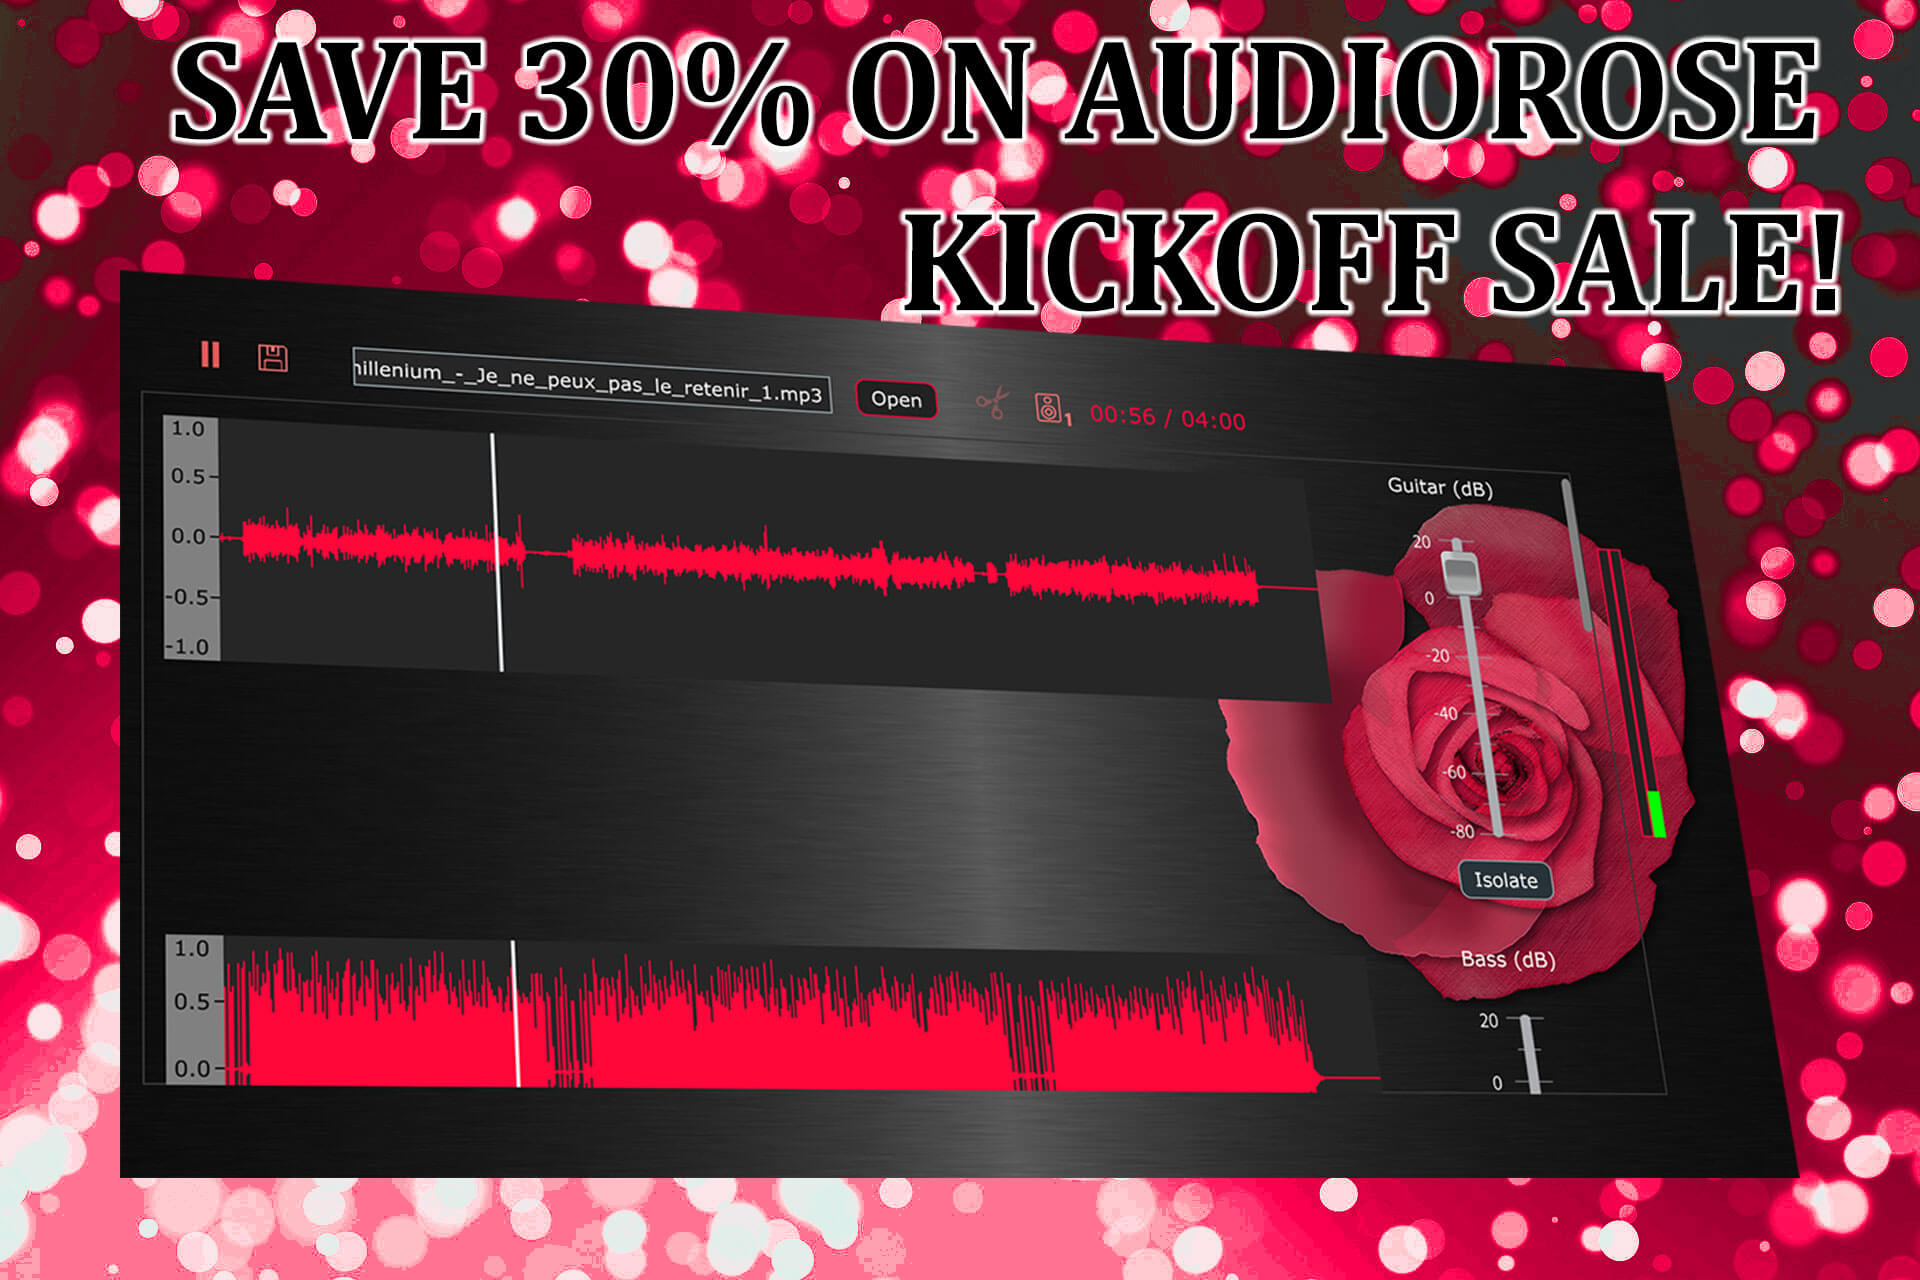 Get 30% off when you download AudioRose today!